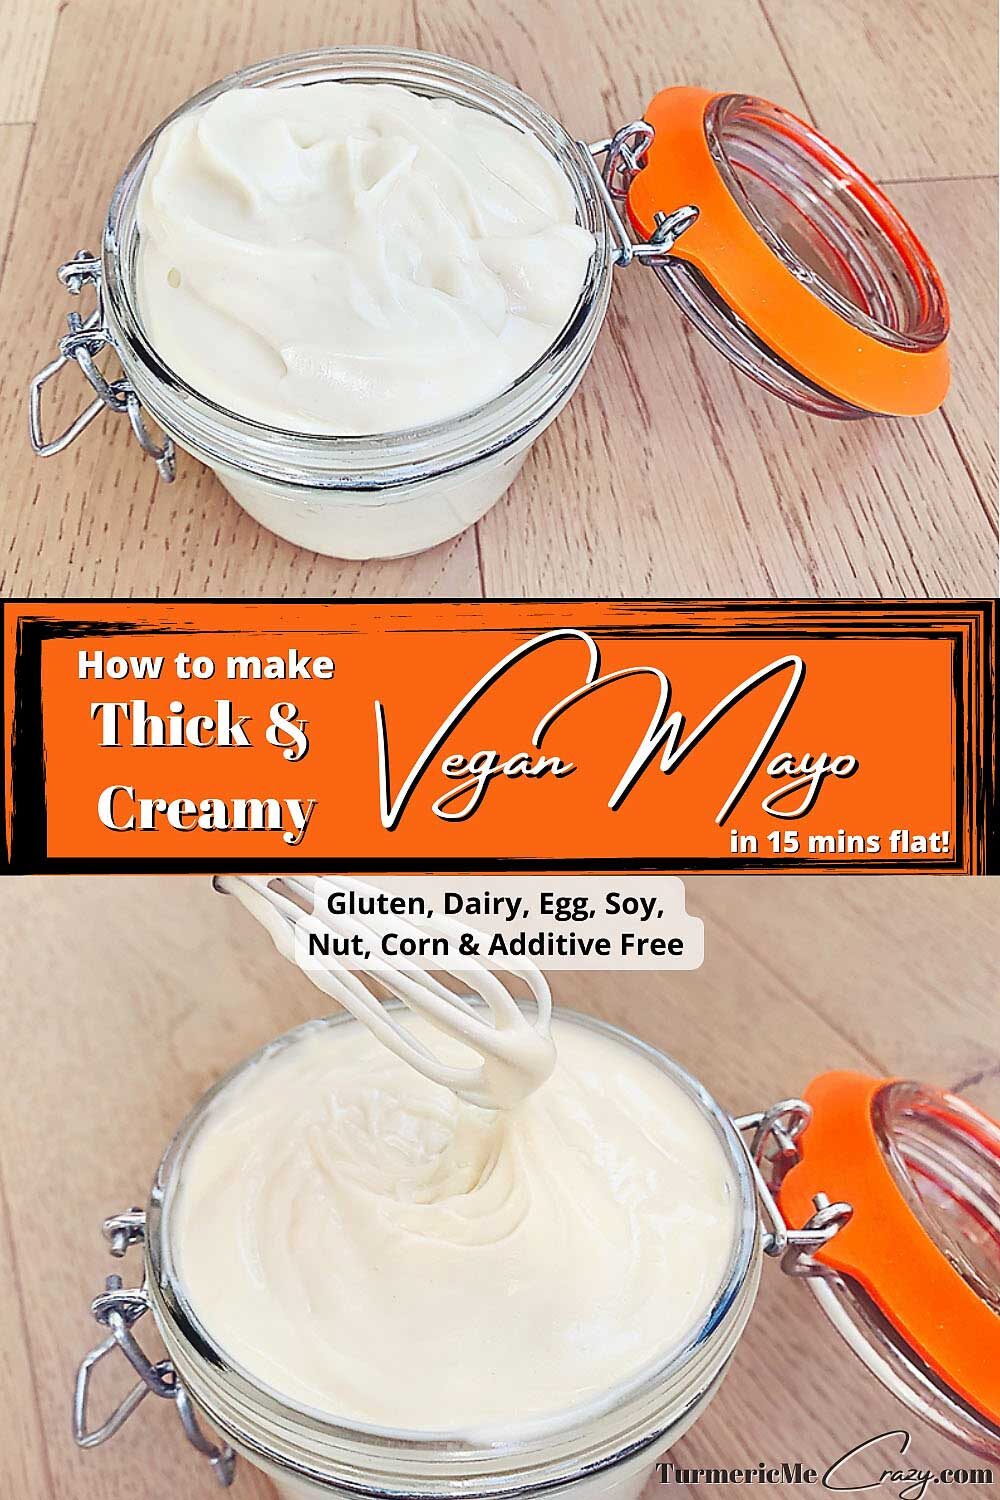 How to make your own Vegan Mayo guide is so QUICK & EASY you can make yourself a jar a mayo quicker than you can run to the store for one! Its thick and creamy texture makes it a wonderful substitute for regular mayonnaise, it can be made in 10-15 minutes flat and it is much healthier for you too!